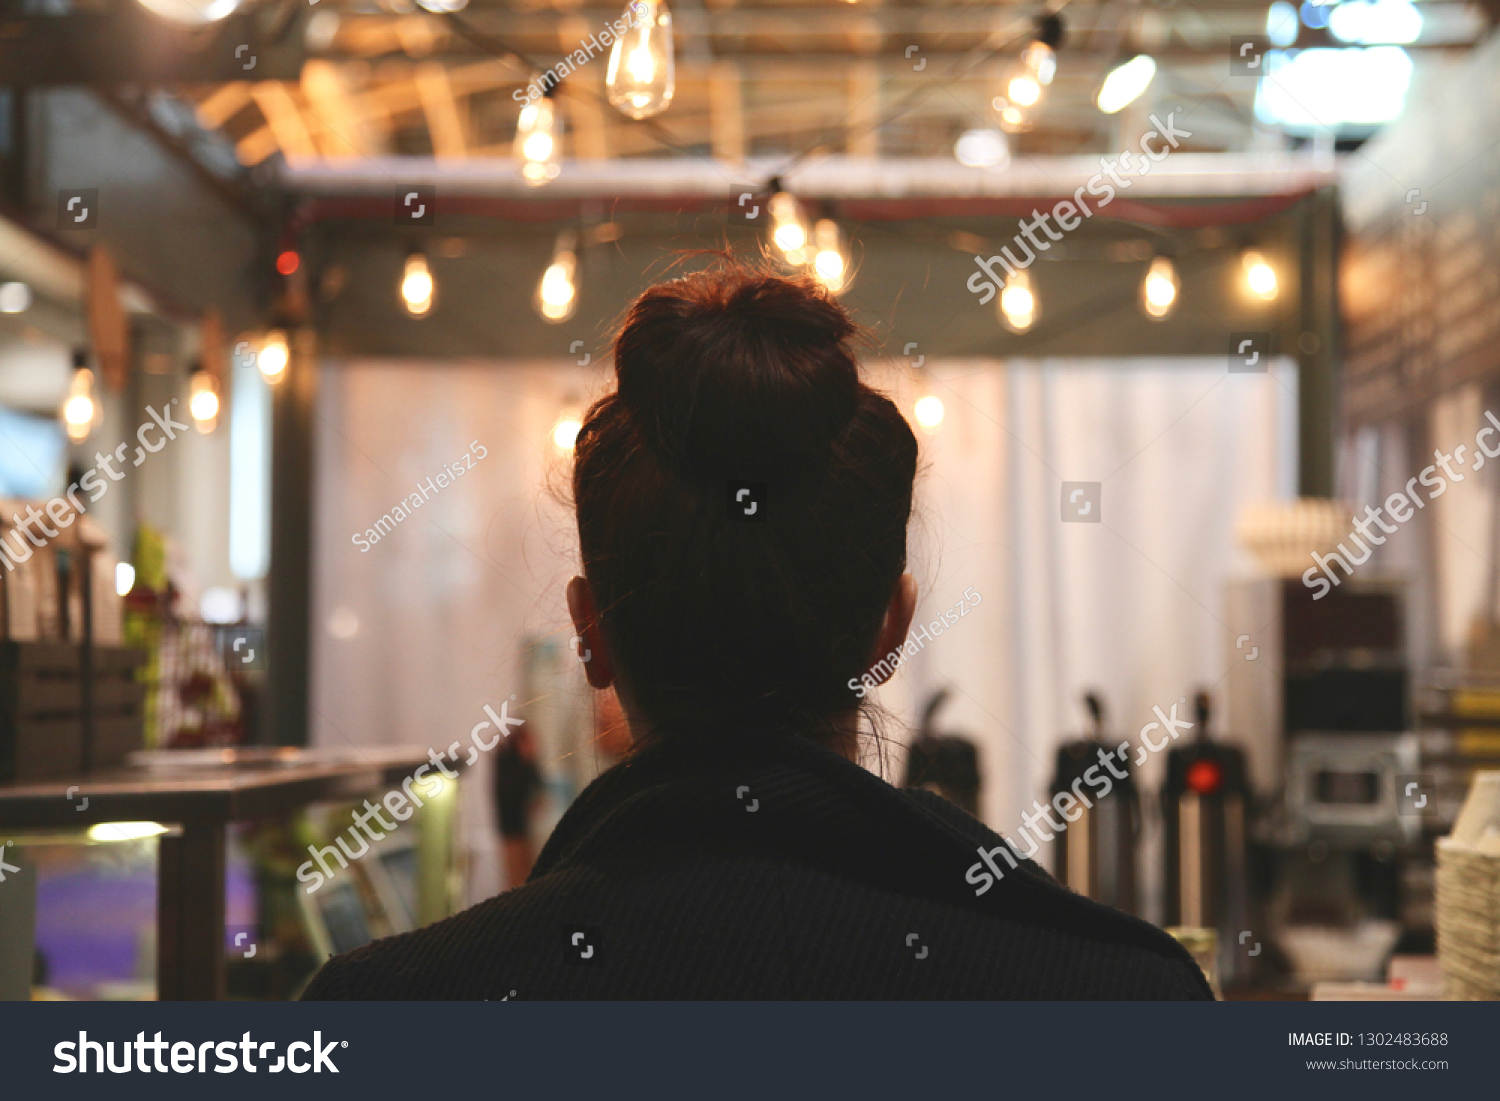 Woman waiting for her coffee at a cafe with string lights  #1302483688